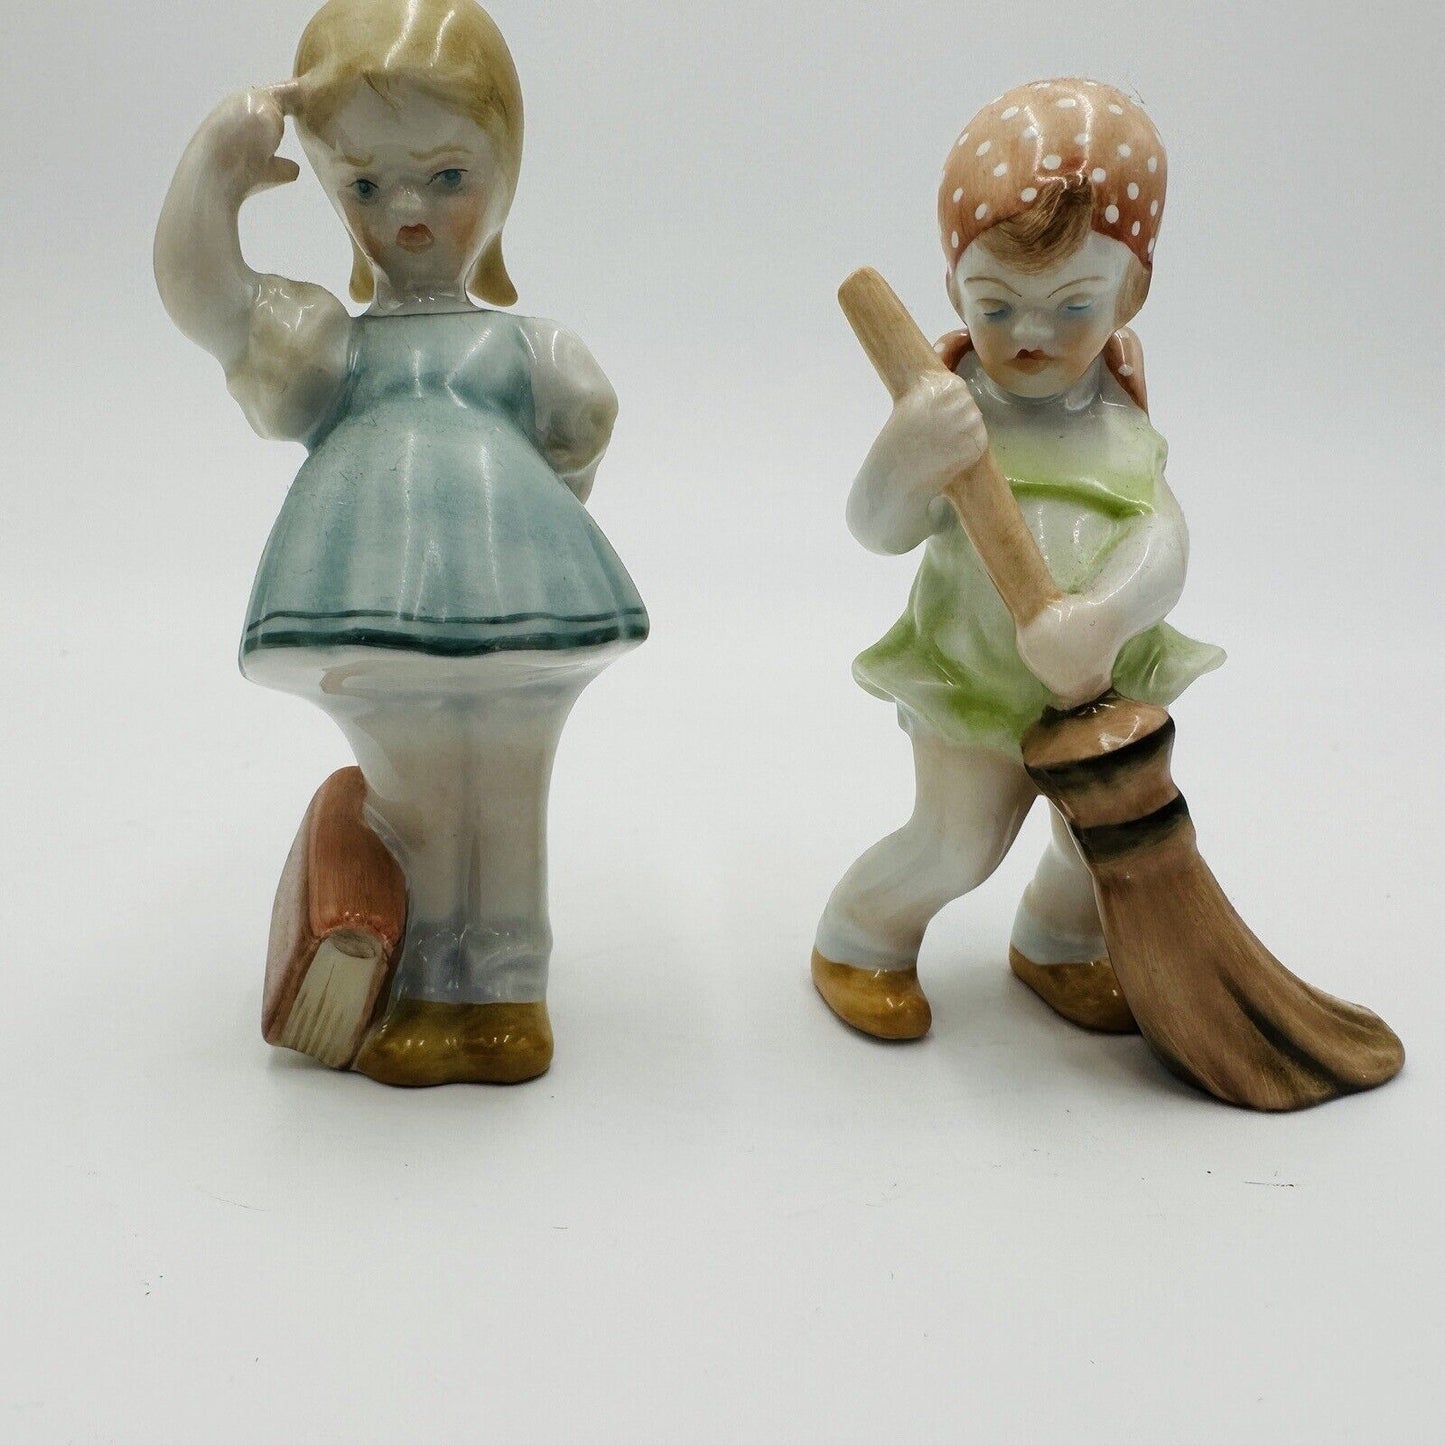 Herend Porcelain Girls Cleaning Broom & School Book Figurines Small 4 inch Decor